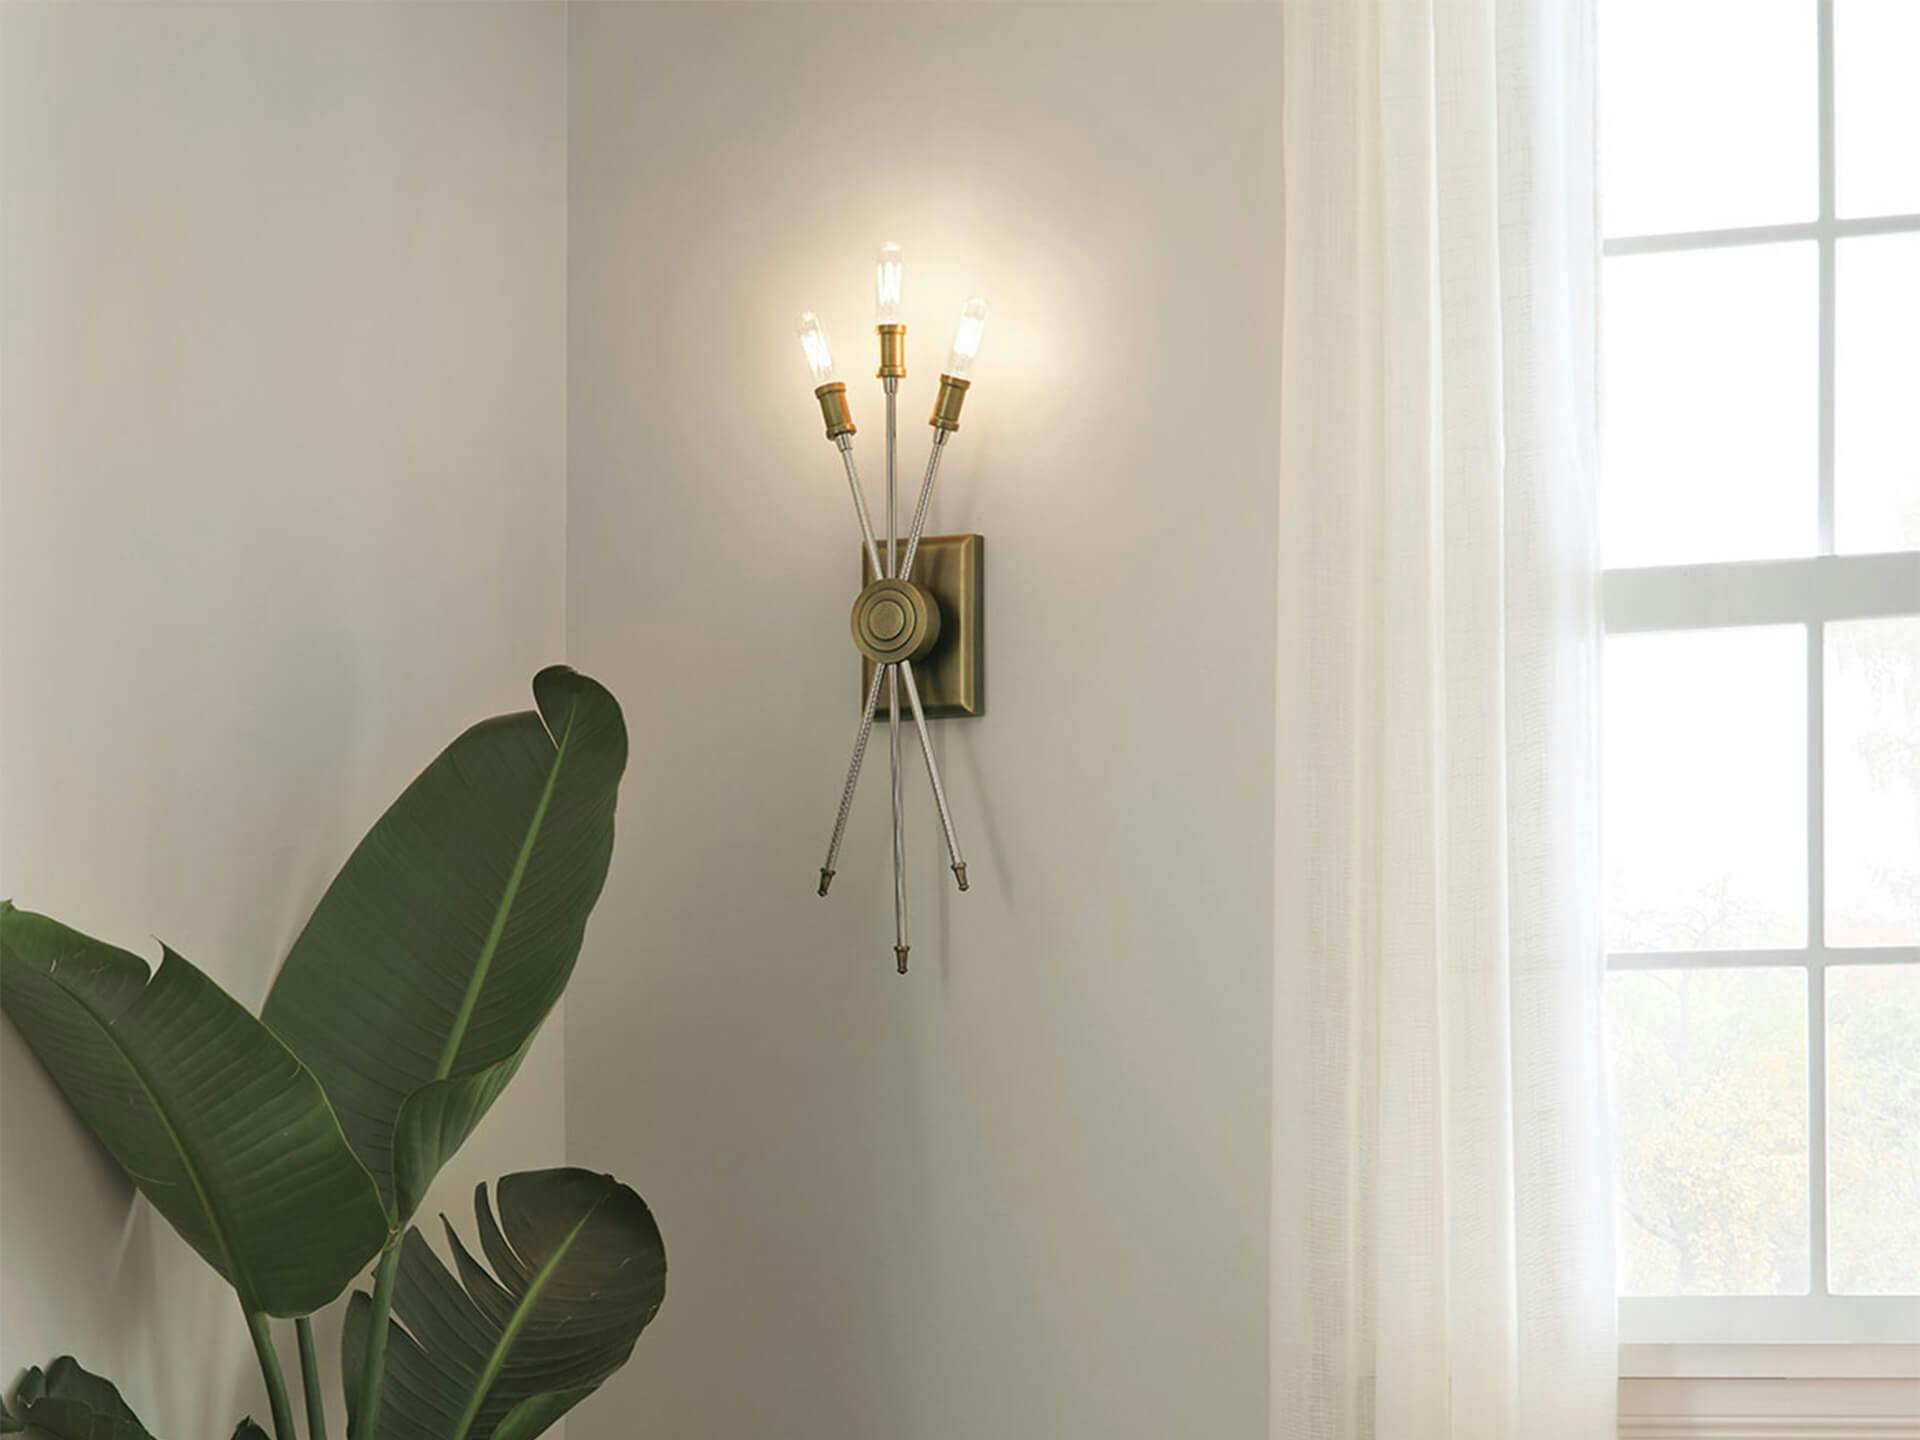 3 Light Doncaster sconce mounted in living room